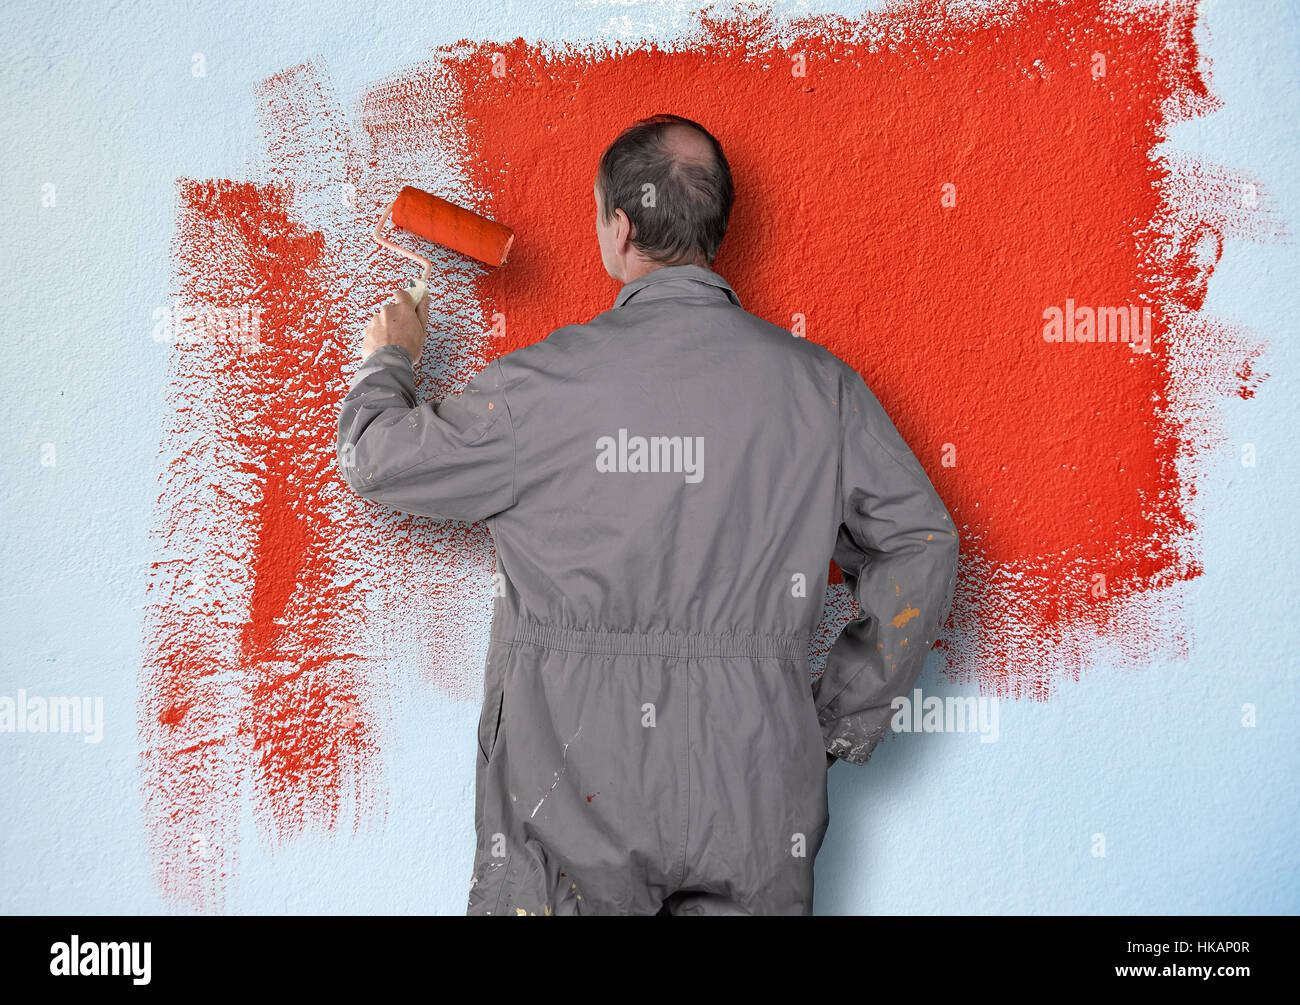 Test painting the blue wall with red color Stock Photo